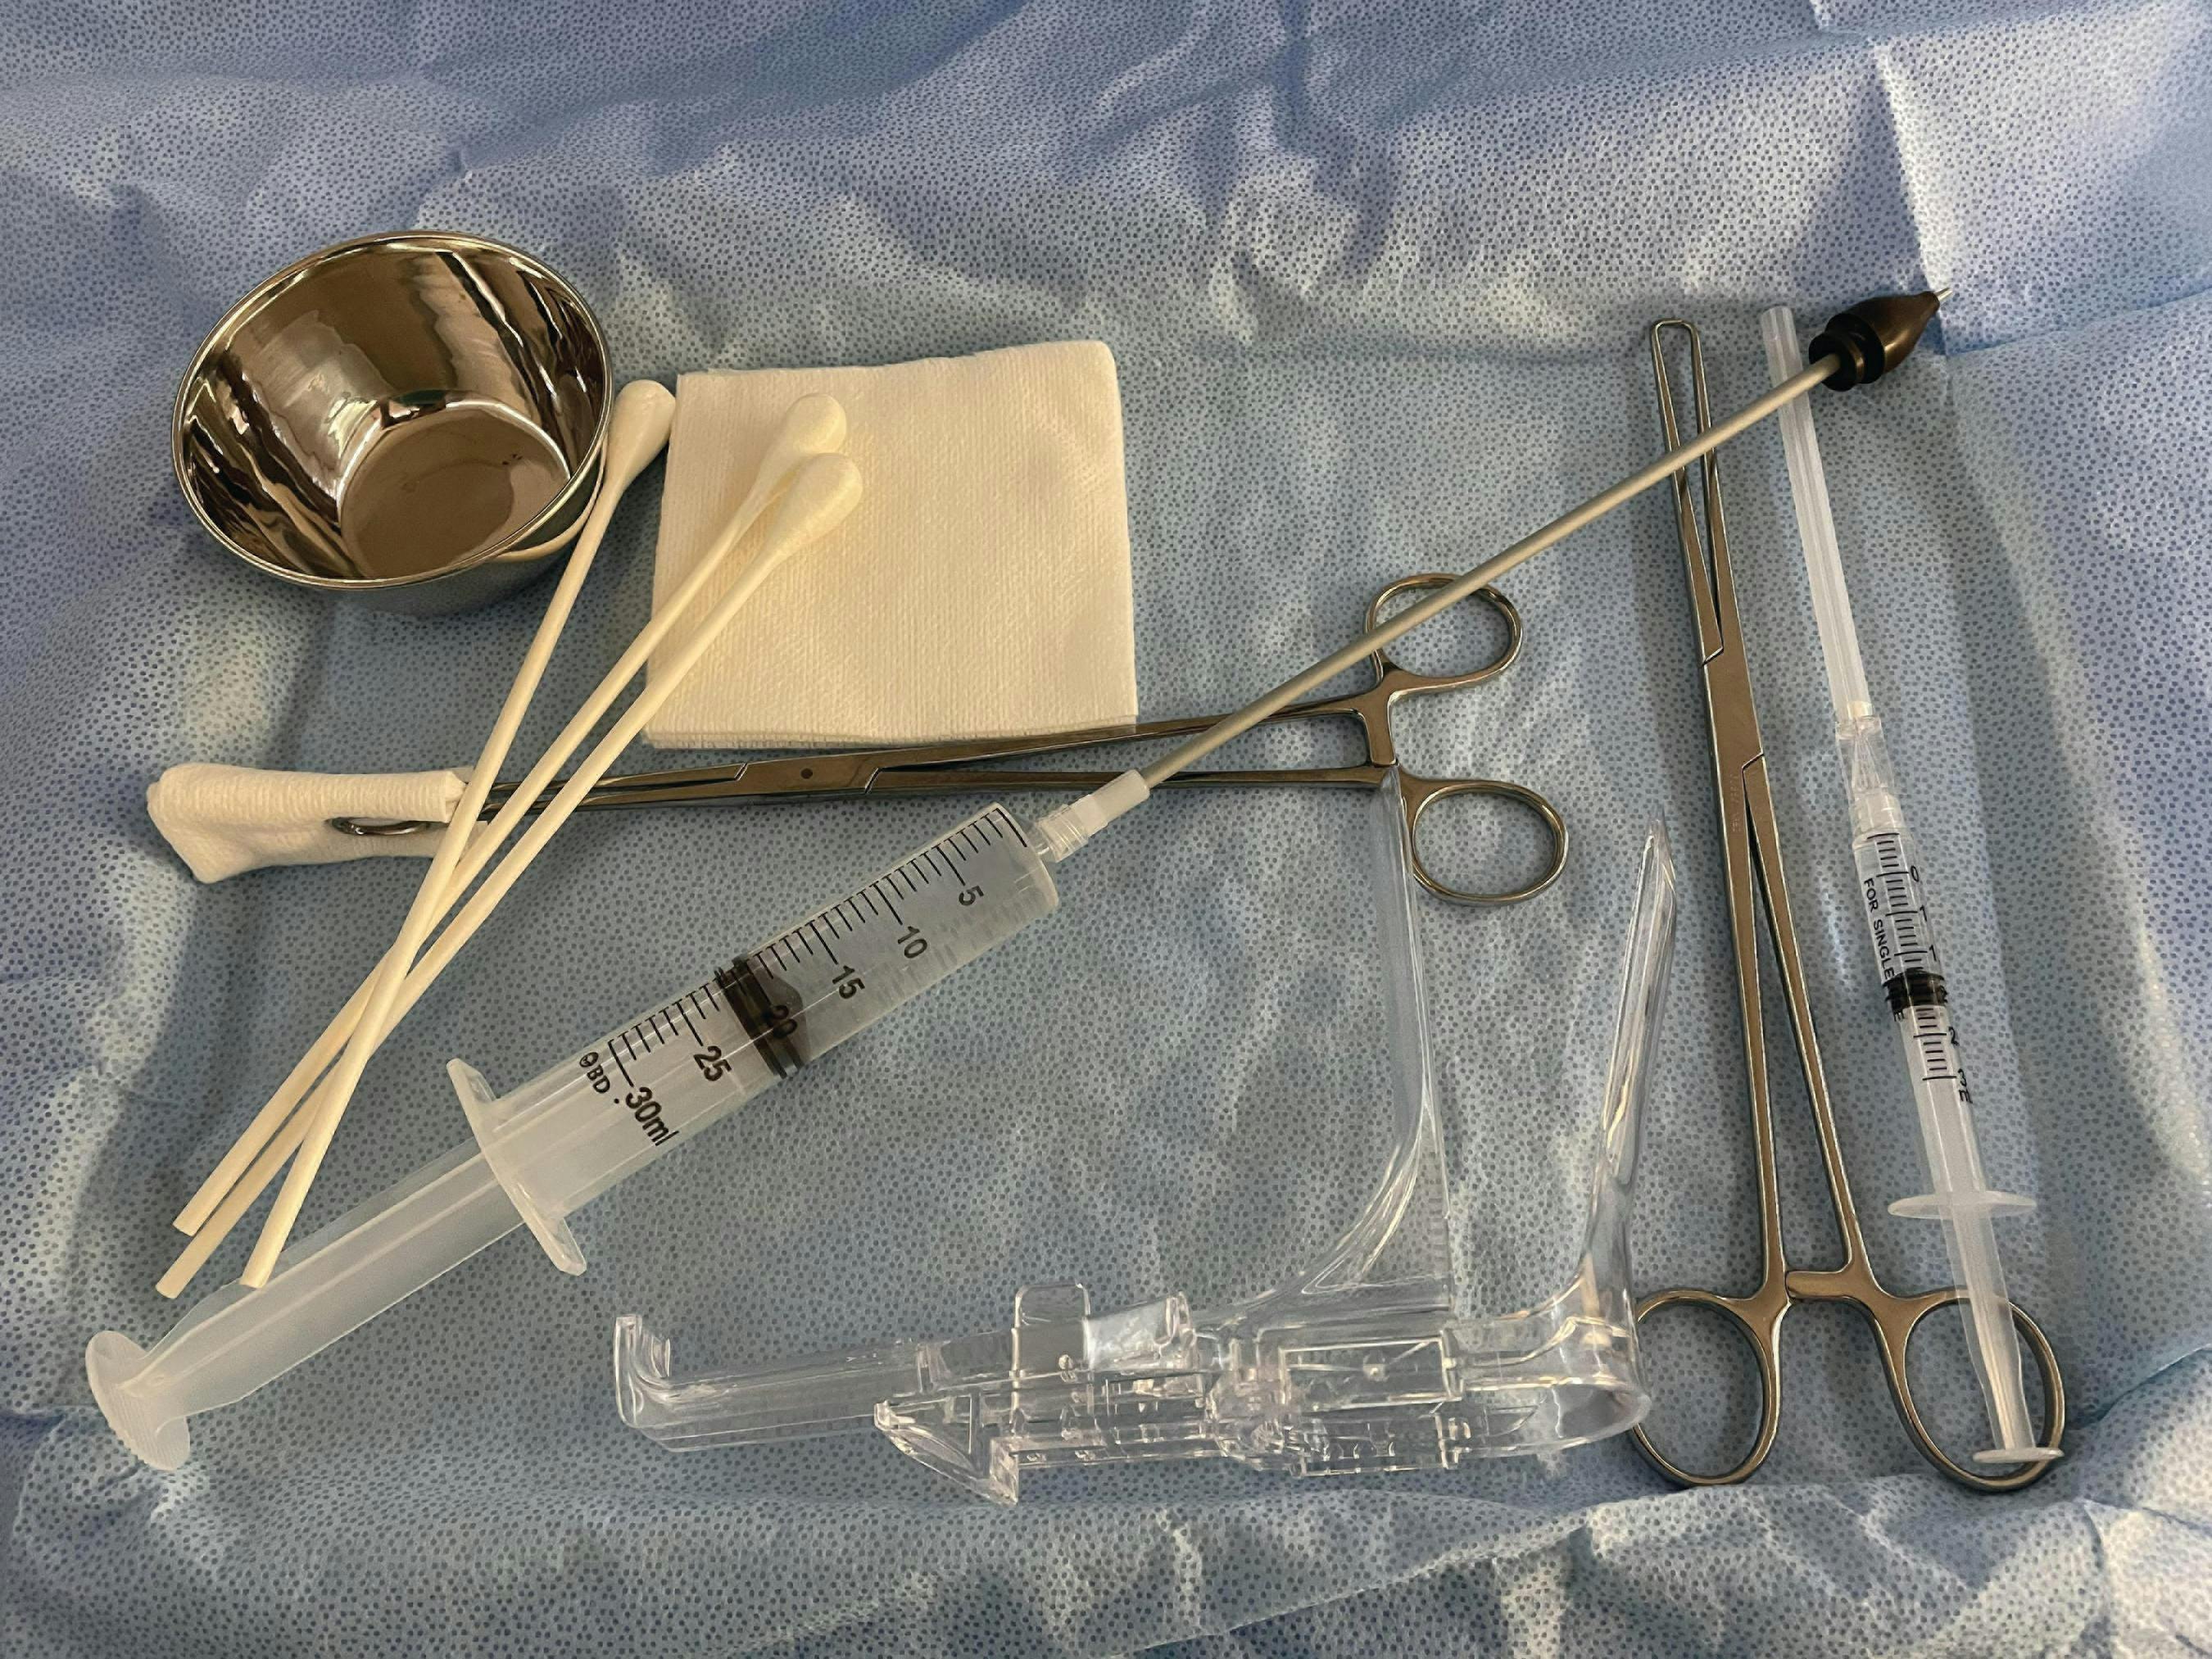 FIGURE 1. Suggested instrumentation to perform a hysterosalpingogram include a speculum, large swabs, sterile 4 x 4 gauze pads, a small solution basin, local anesthetic, single-tooth tenaculum, a syringe attached to a cannula, and a ring forceps.